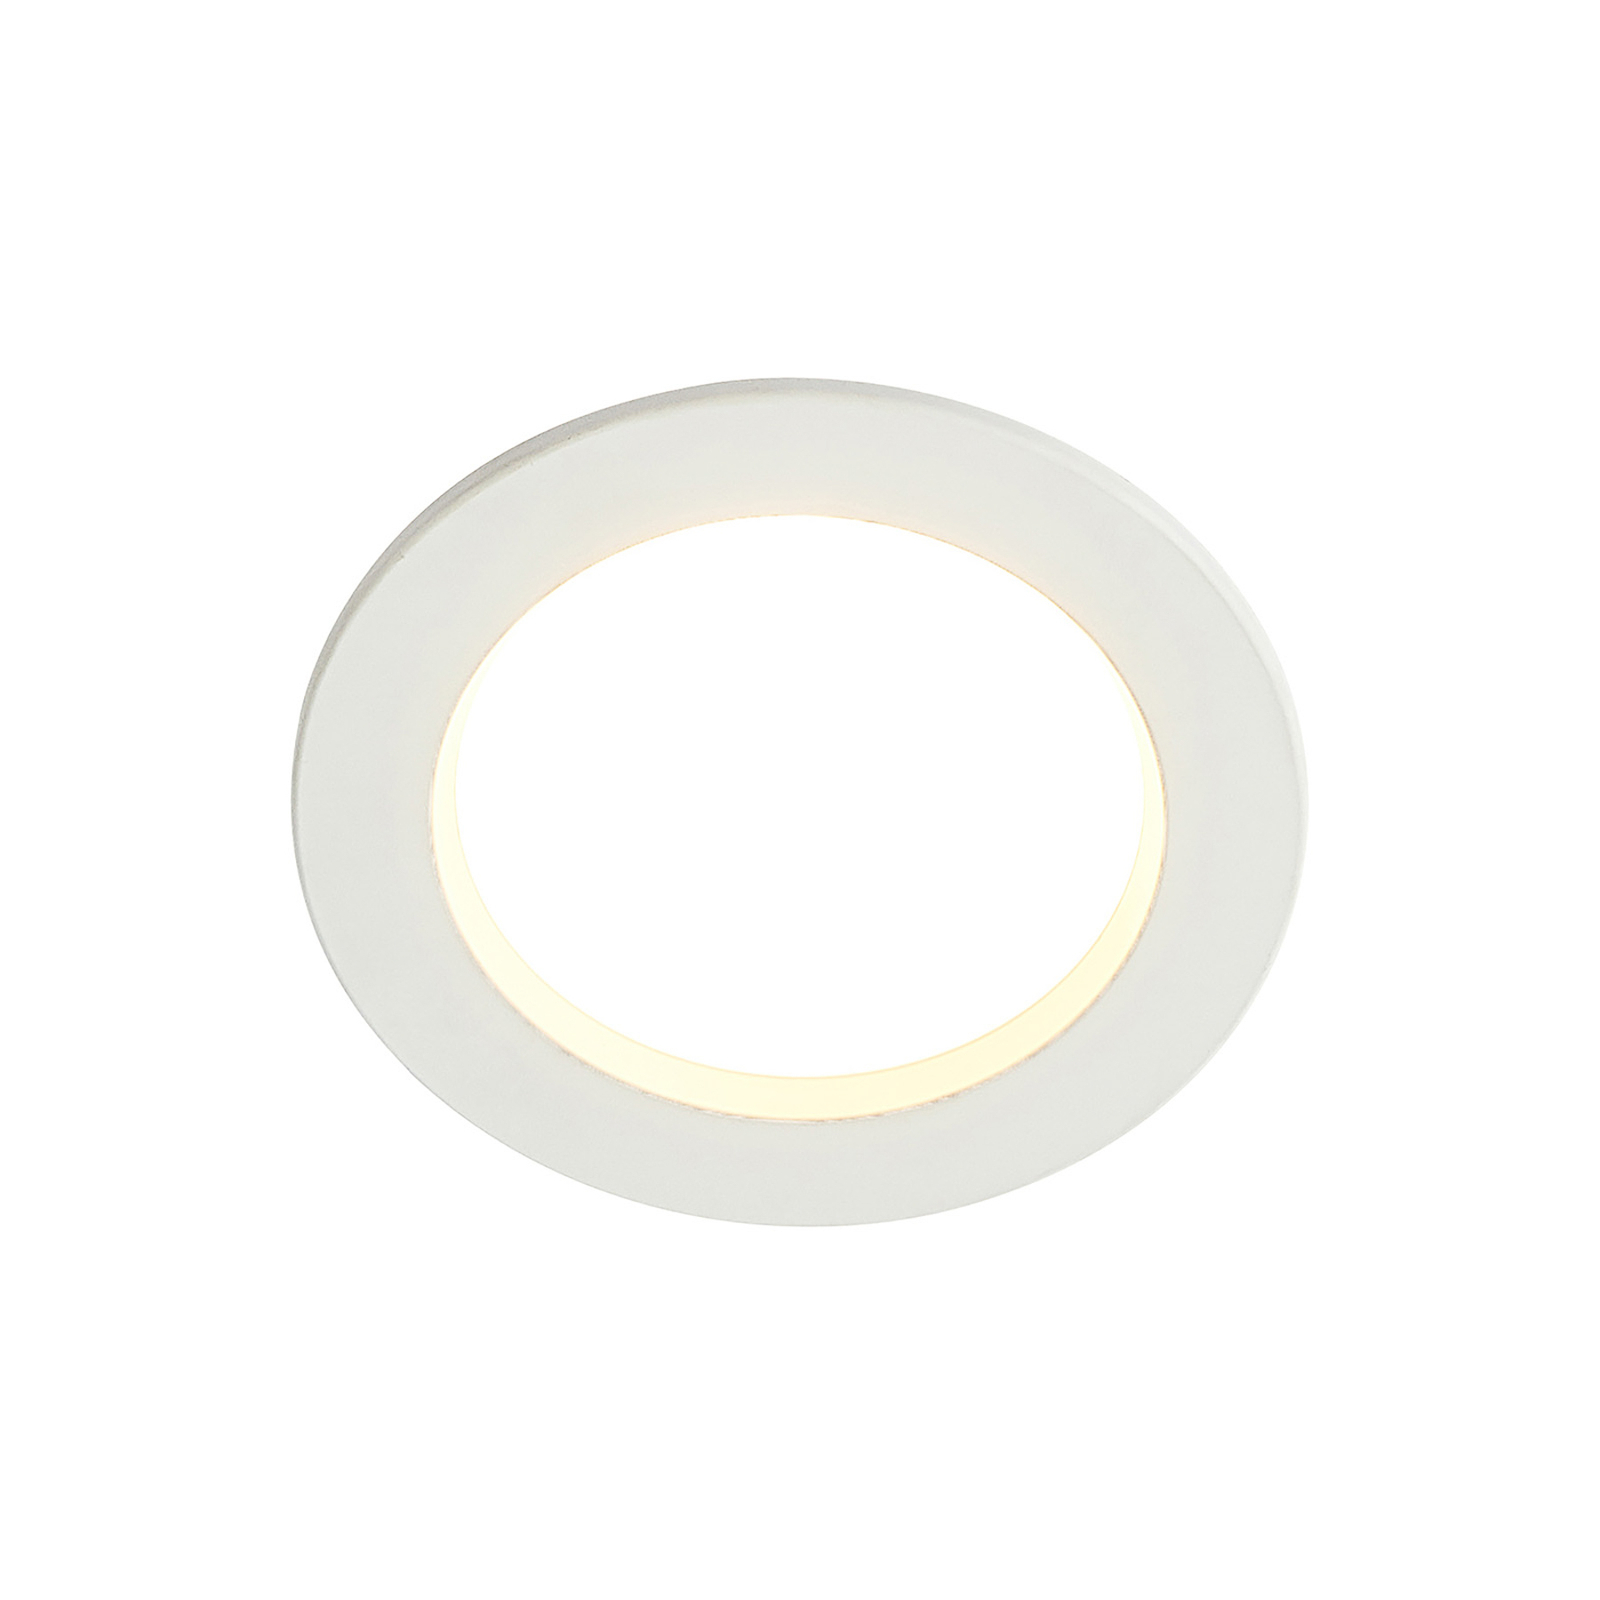 Arcchio LED recessed light Milaine, white, dimmable, set of 2